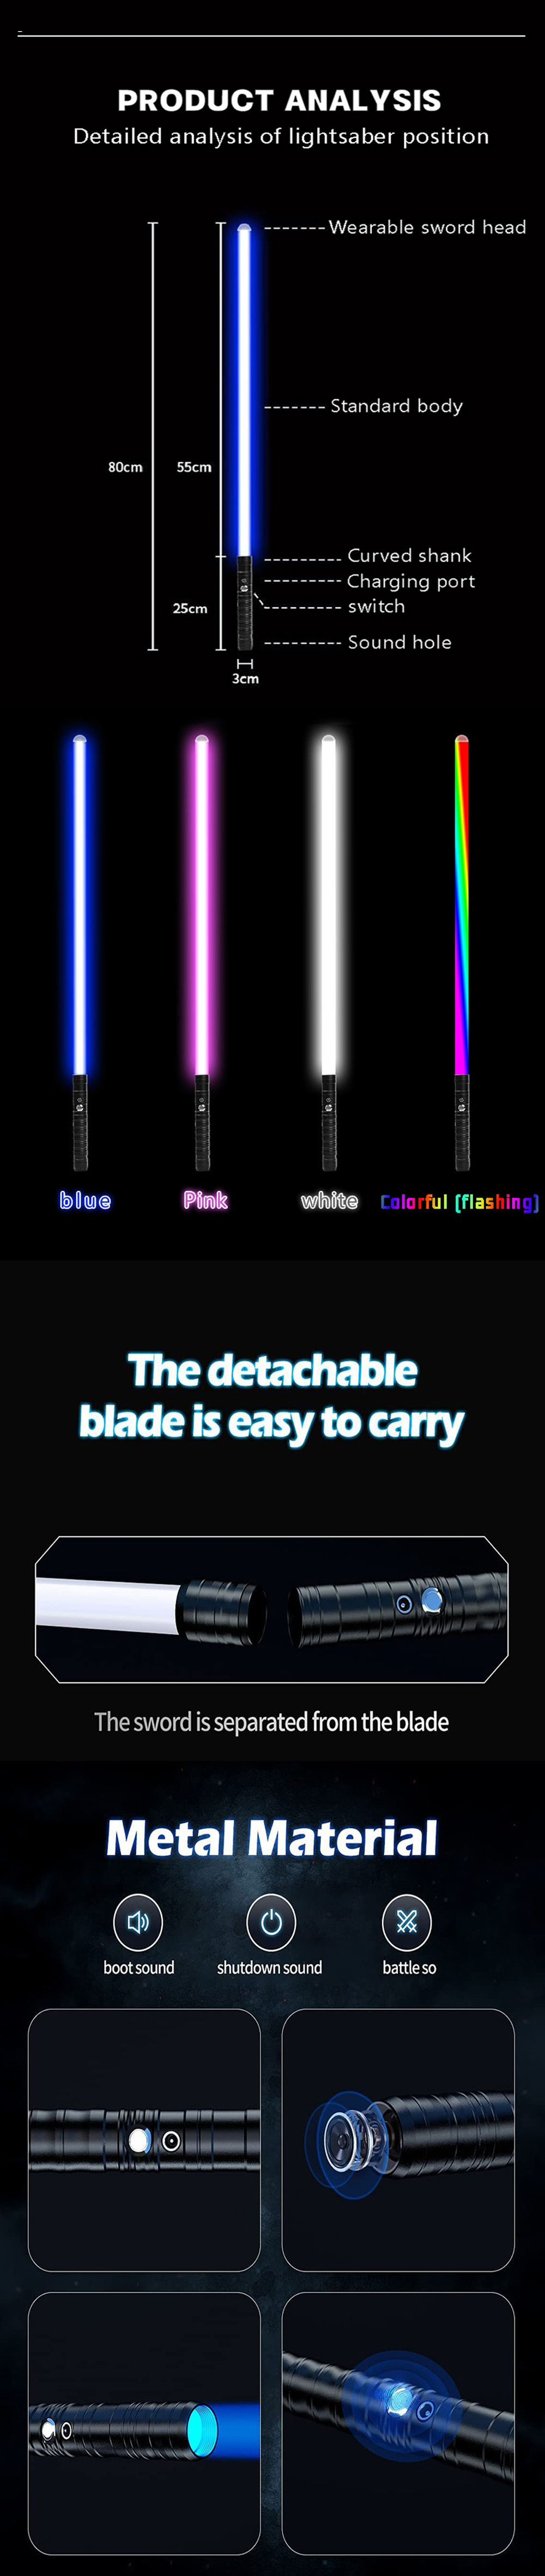 Bikight-Lightsaber-RGB-7-Colors-2-in-1-LED-Light-USB-Rechargeable-Metal-Handle-Dueling-Sound-Light-S-1917772-2